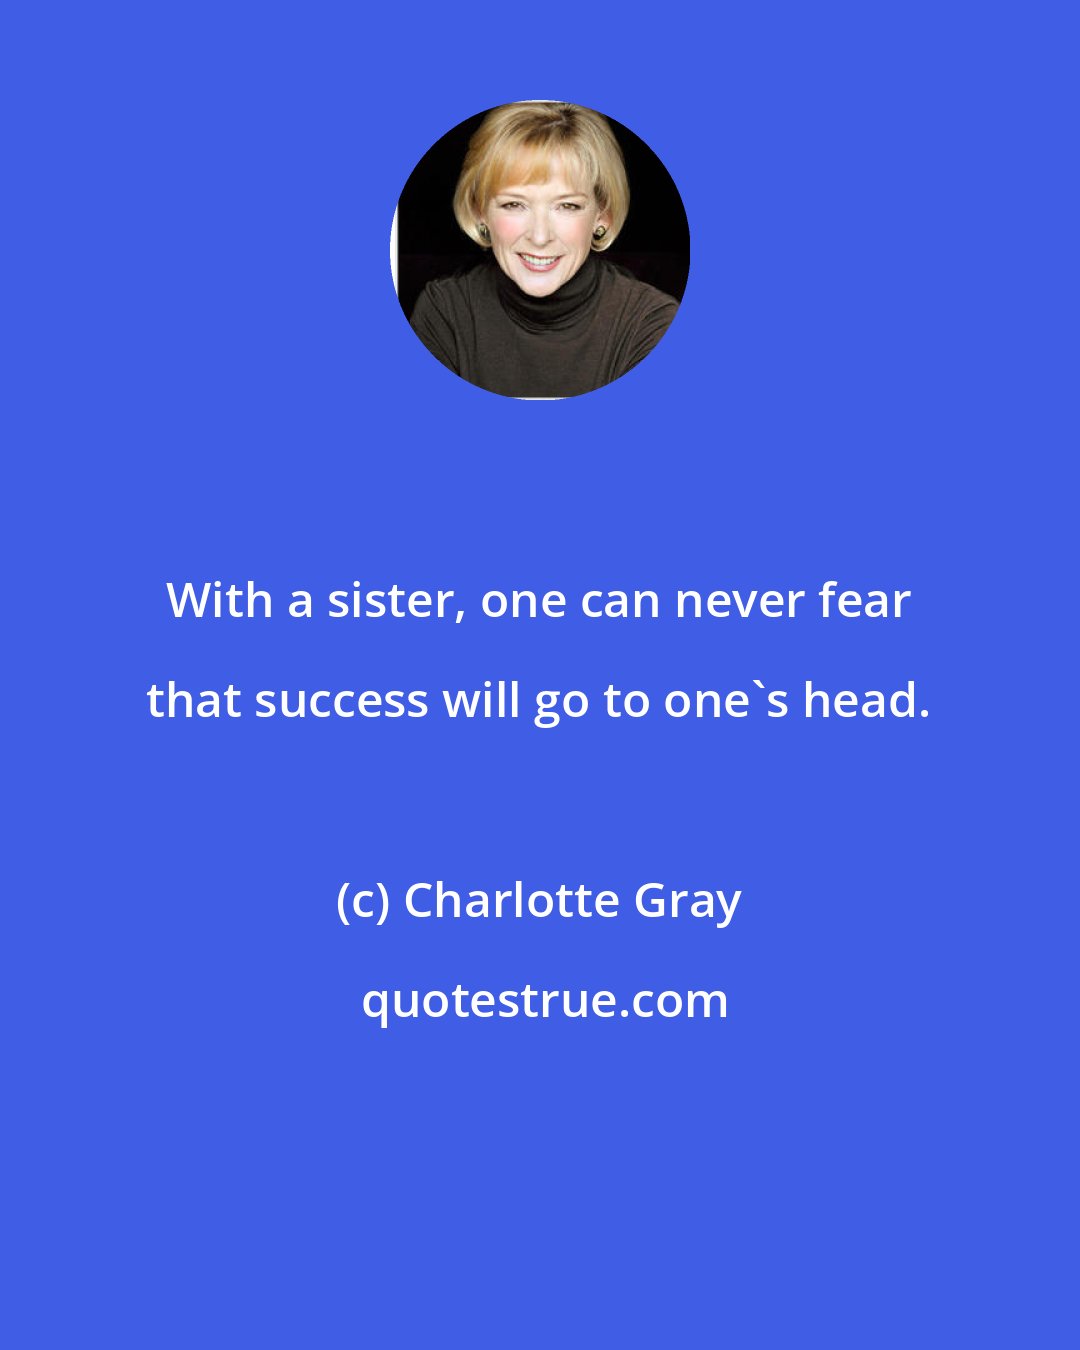 Charlotte Gray: With a sister, one can never fear that success will go to one's head.